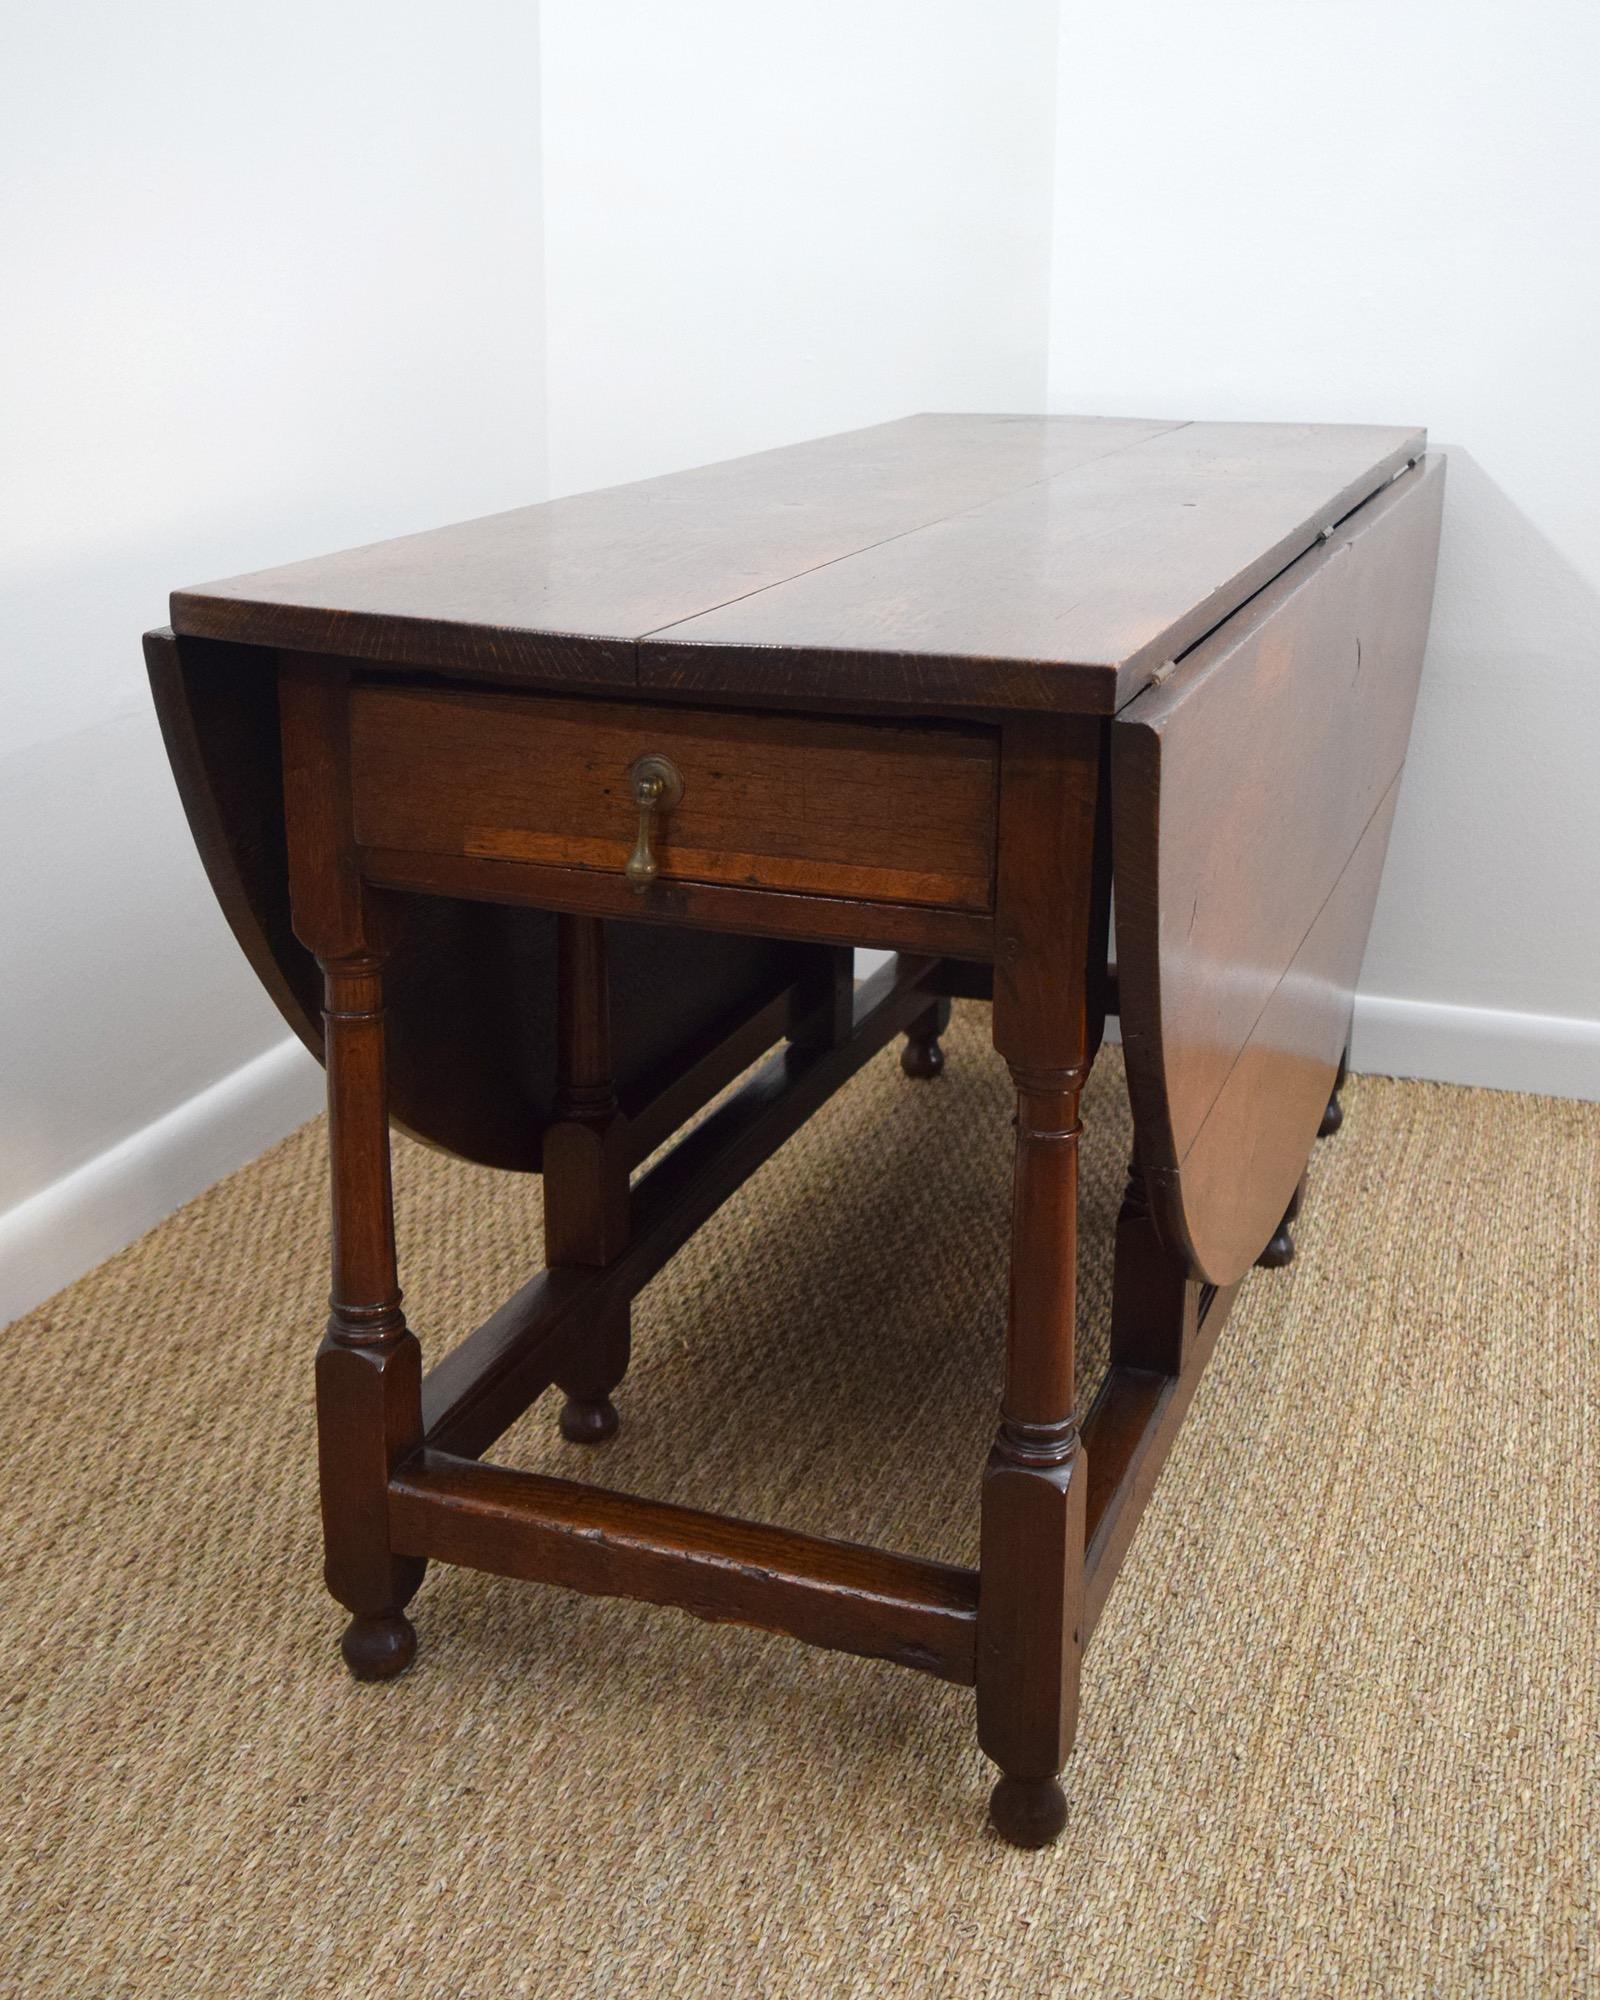 French gate-leg table, circa 1650. Oak with metal fittings. Measures: Height 28 ¼“ width 54“ depth 20 ½“ / 41 ½“/ 62“ $20,000.

This solid oak French Baroque table has two pivoting legs on each side to support hinged leaves. It can do triple duty